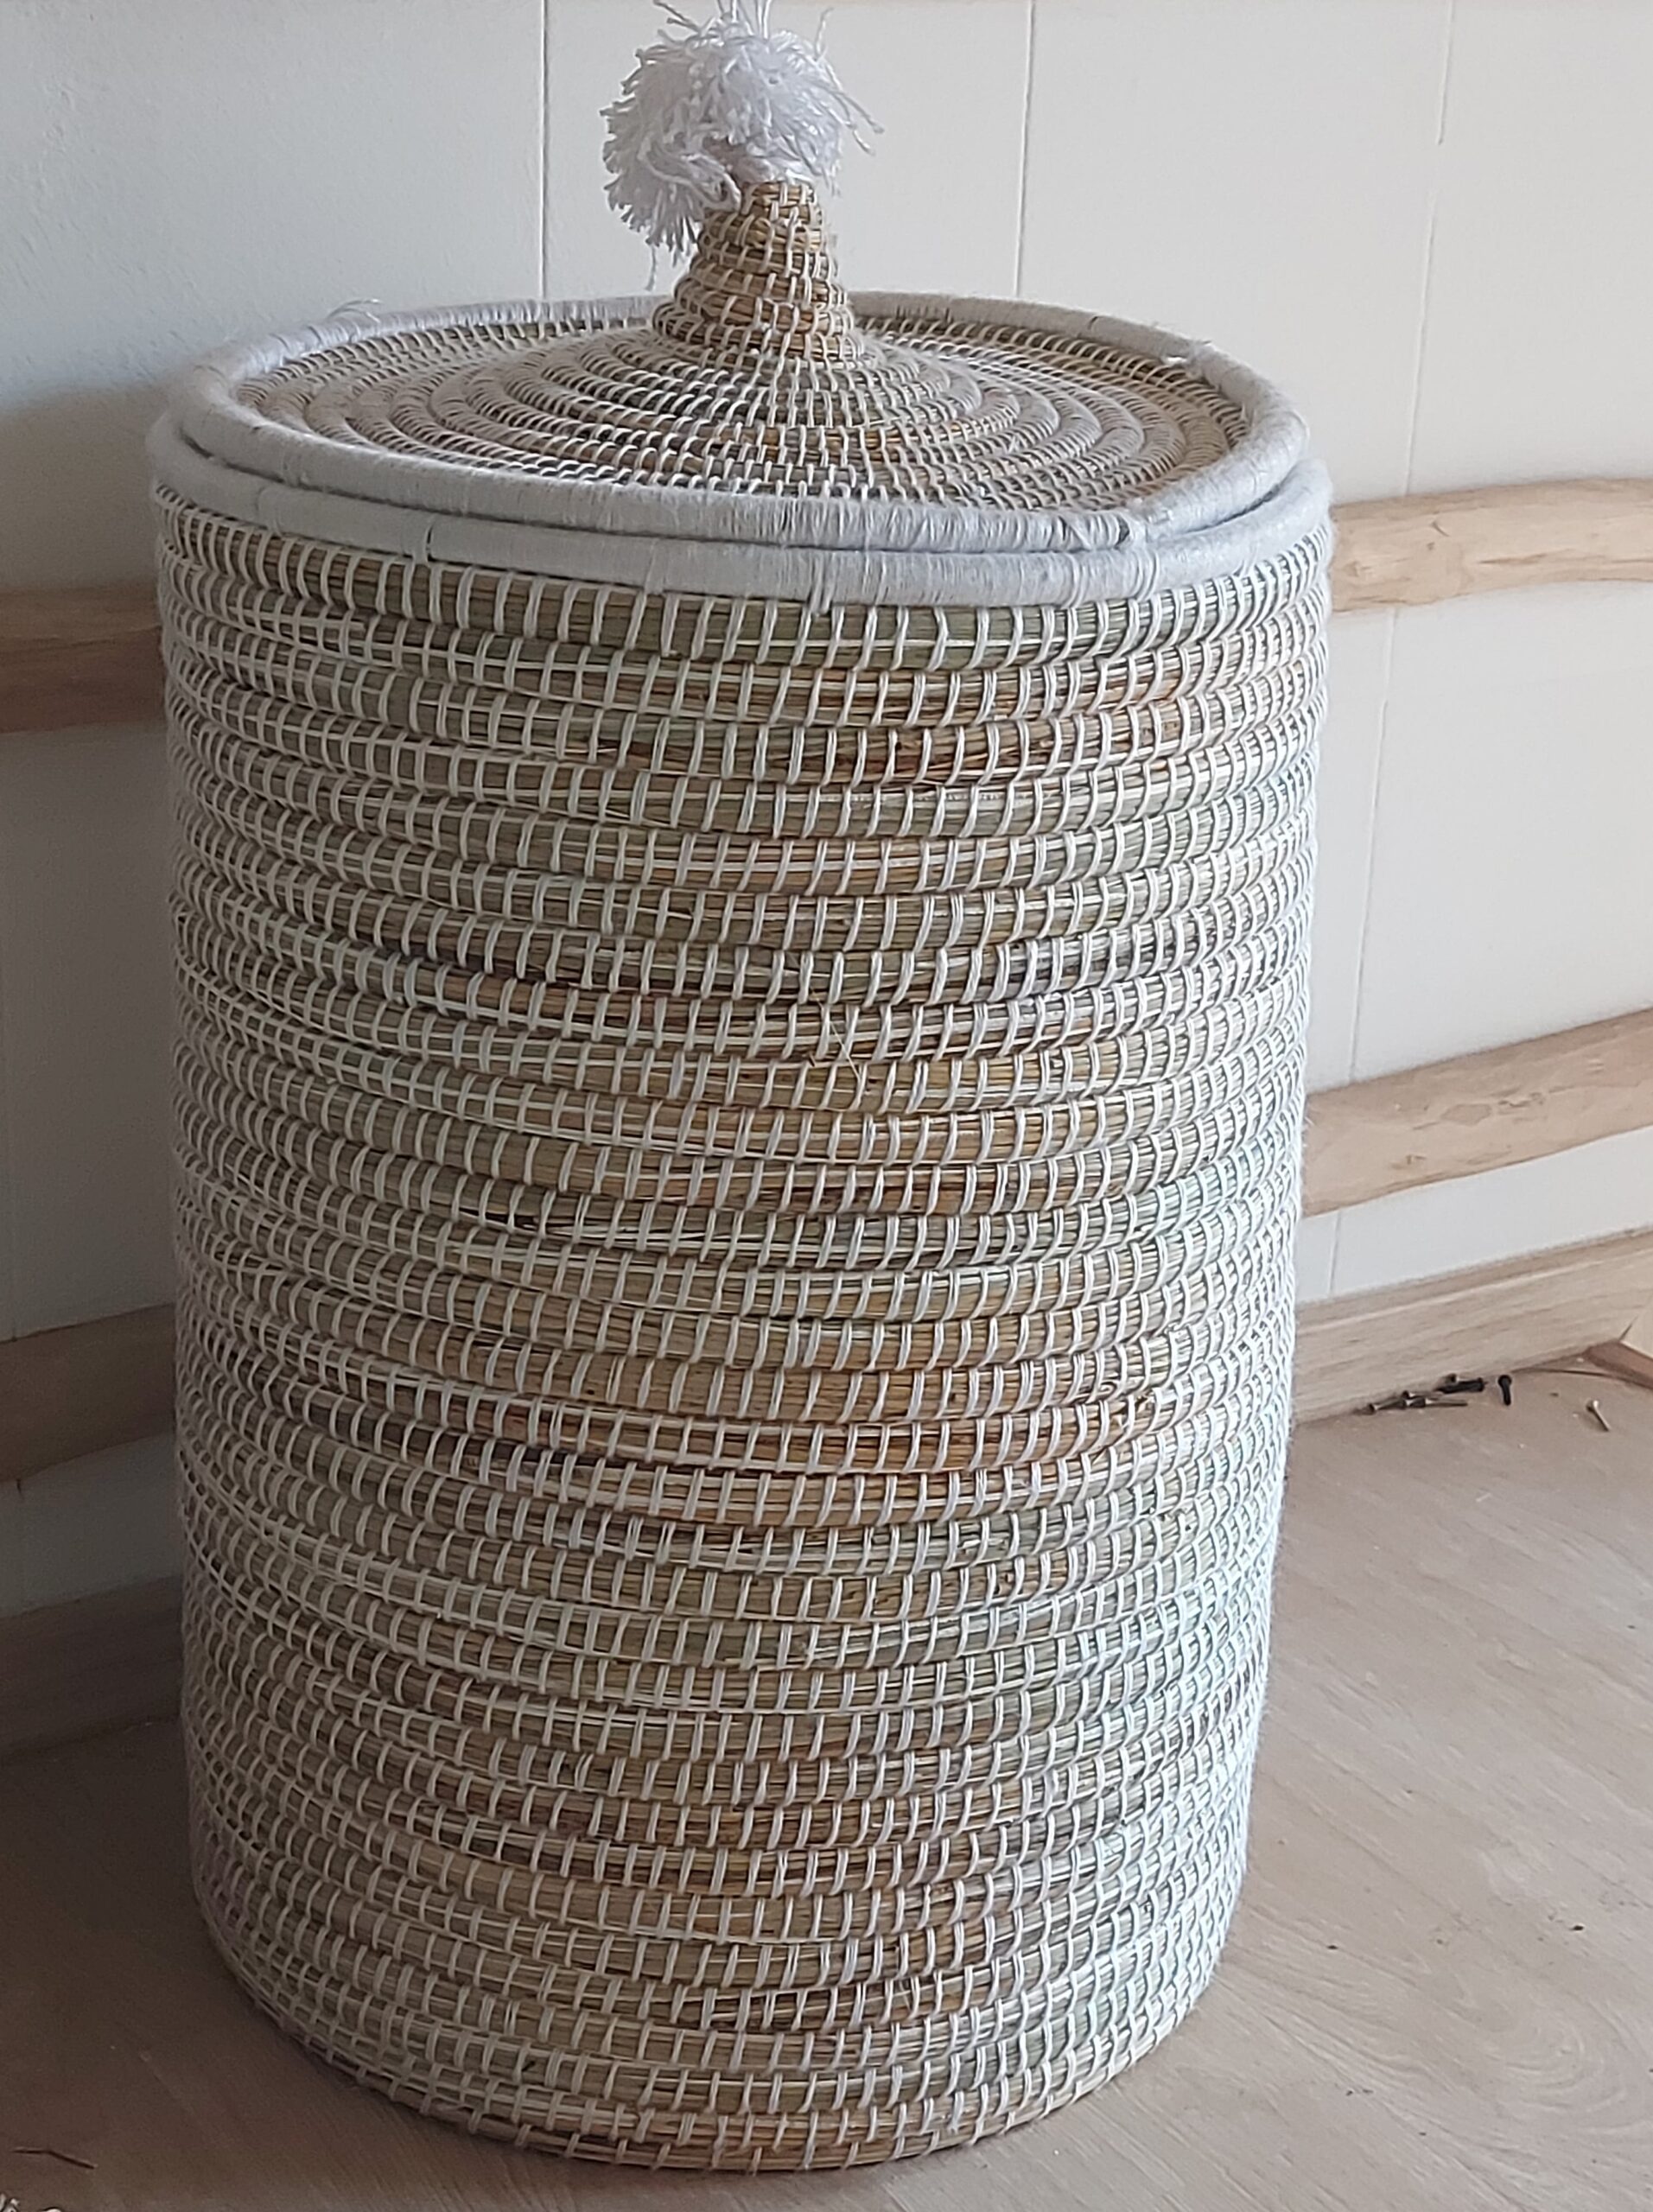 High wicker basket with white rope and pom